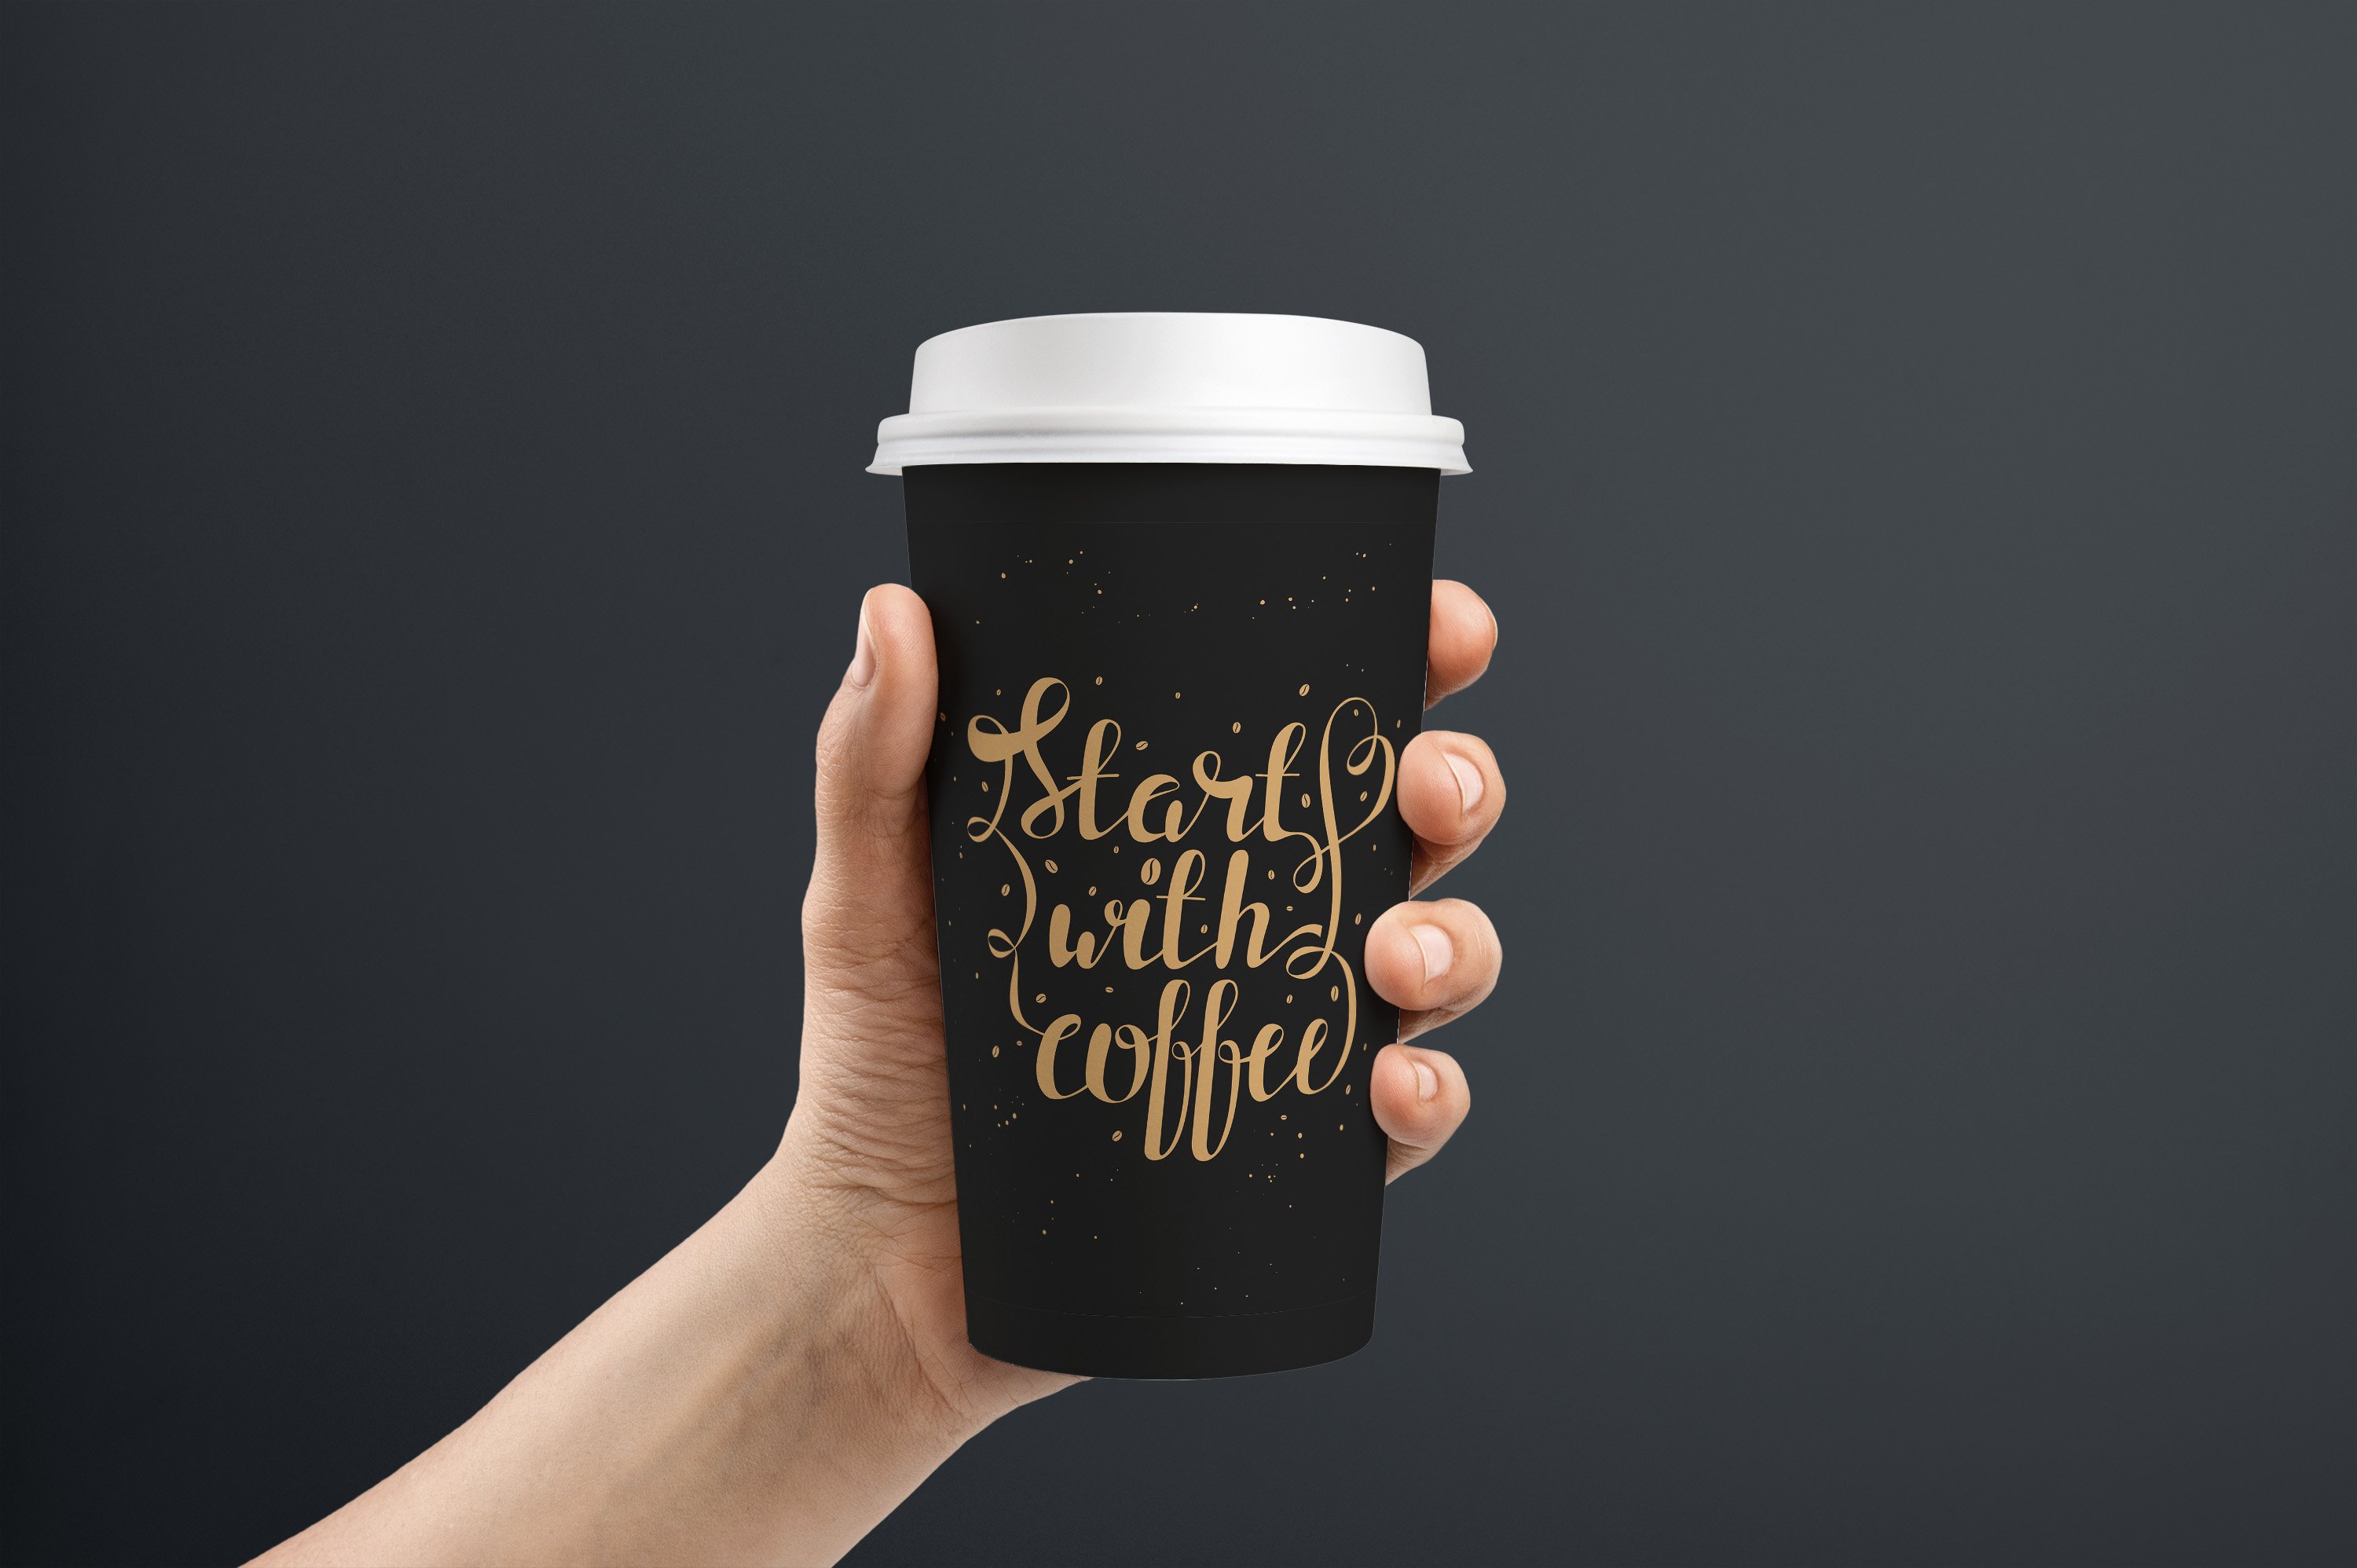 A hand holding a black coffee cup with gold lettering.